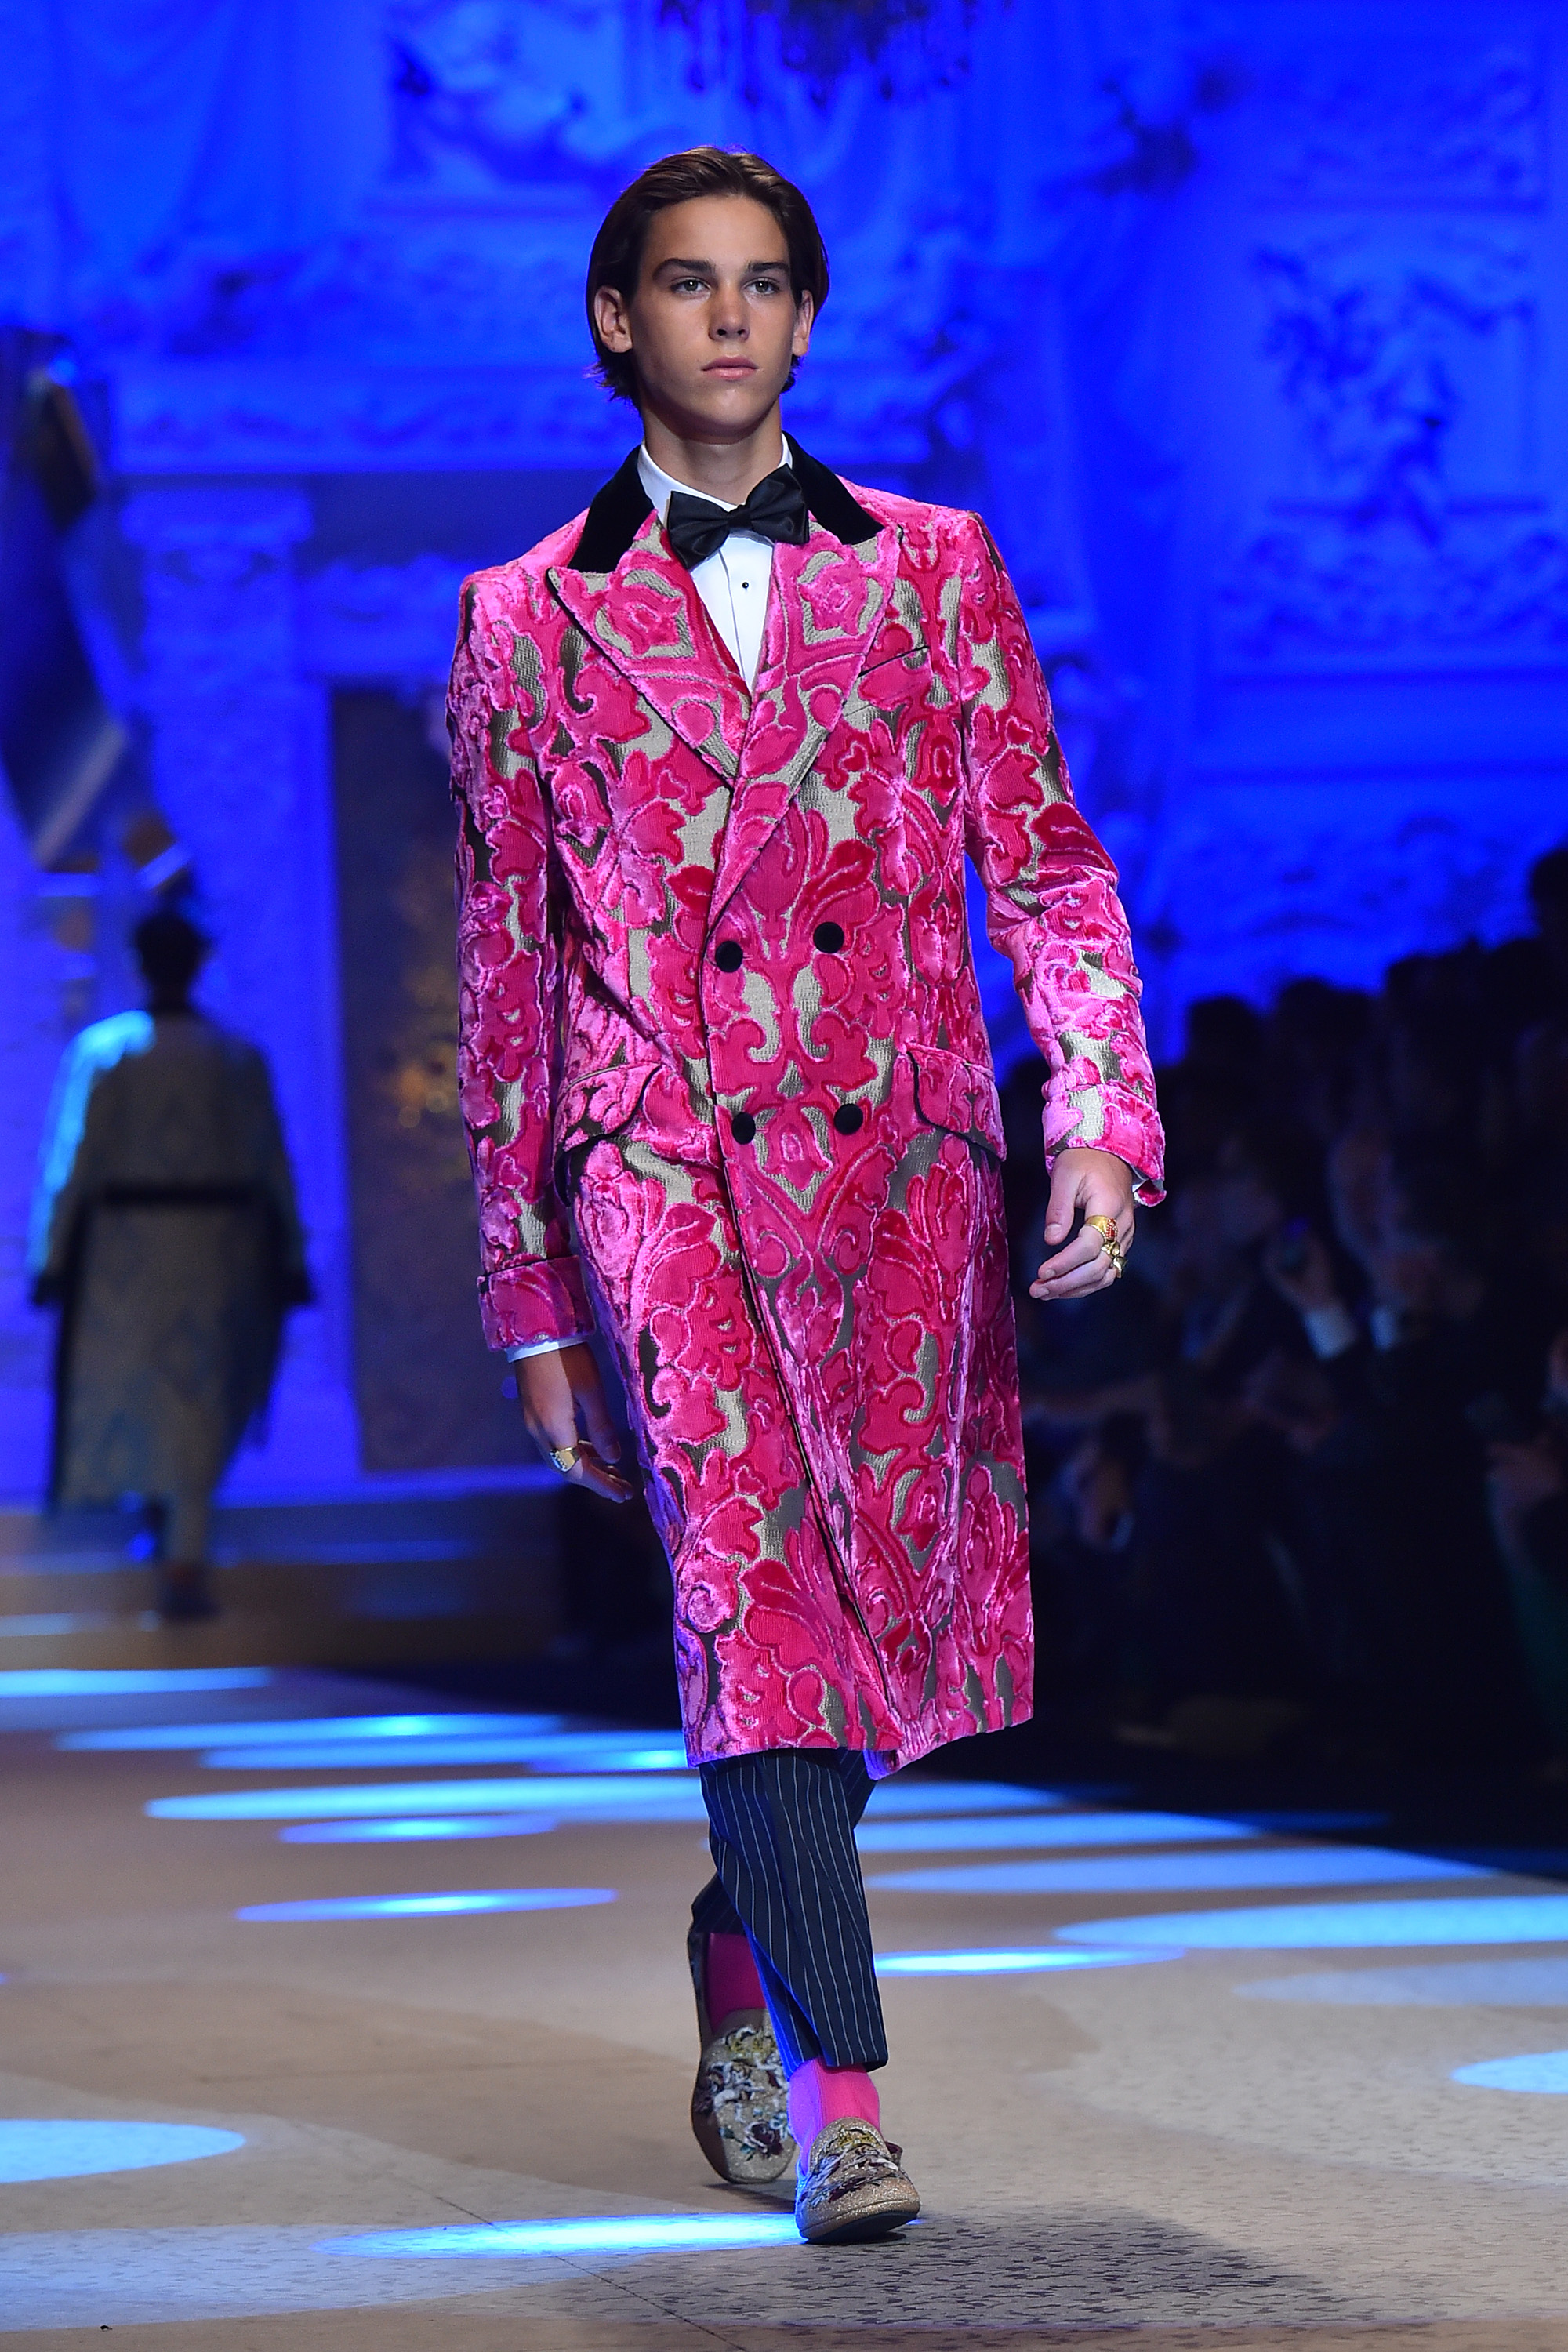 Paris Brosnan walks the runway at the Dolce & Gabbana show during Milan Men's Fashion Week Fall/Winter 2018/19 on January 13, 2018 in Milan, Italy | Source: Getty Images